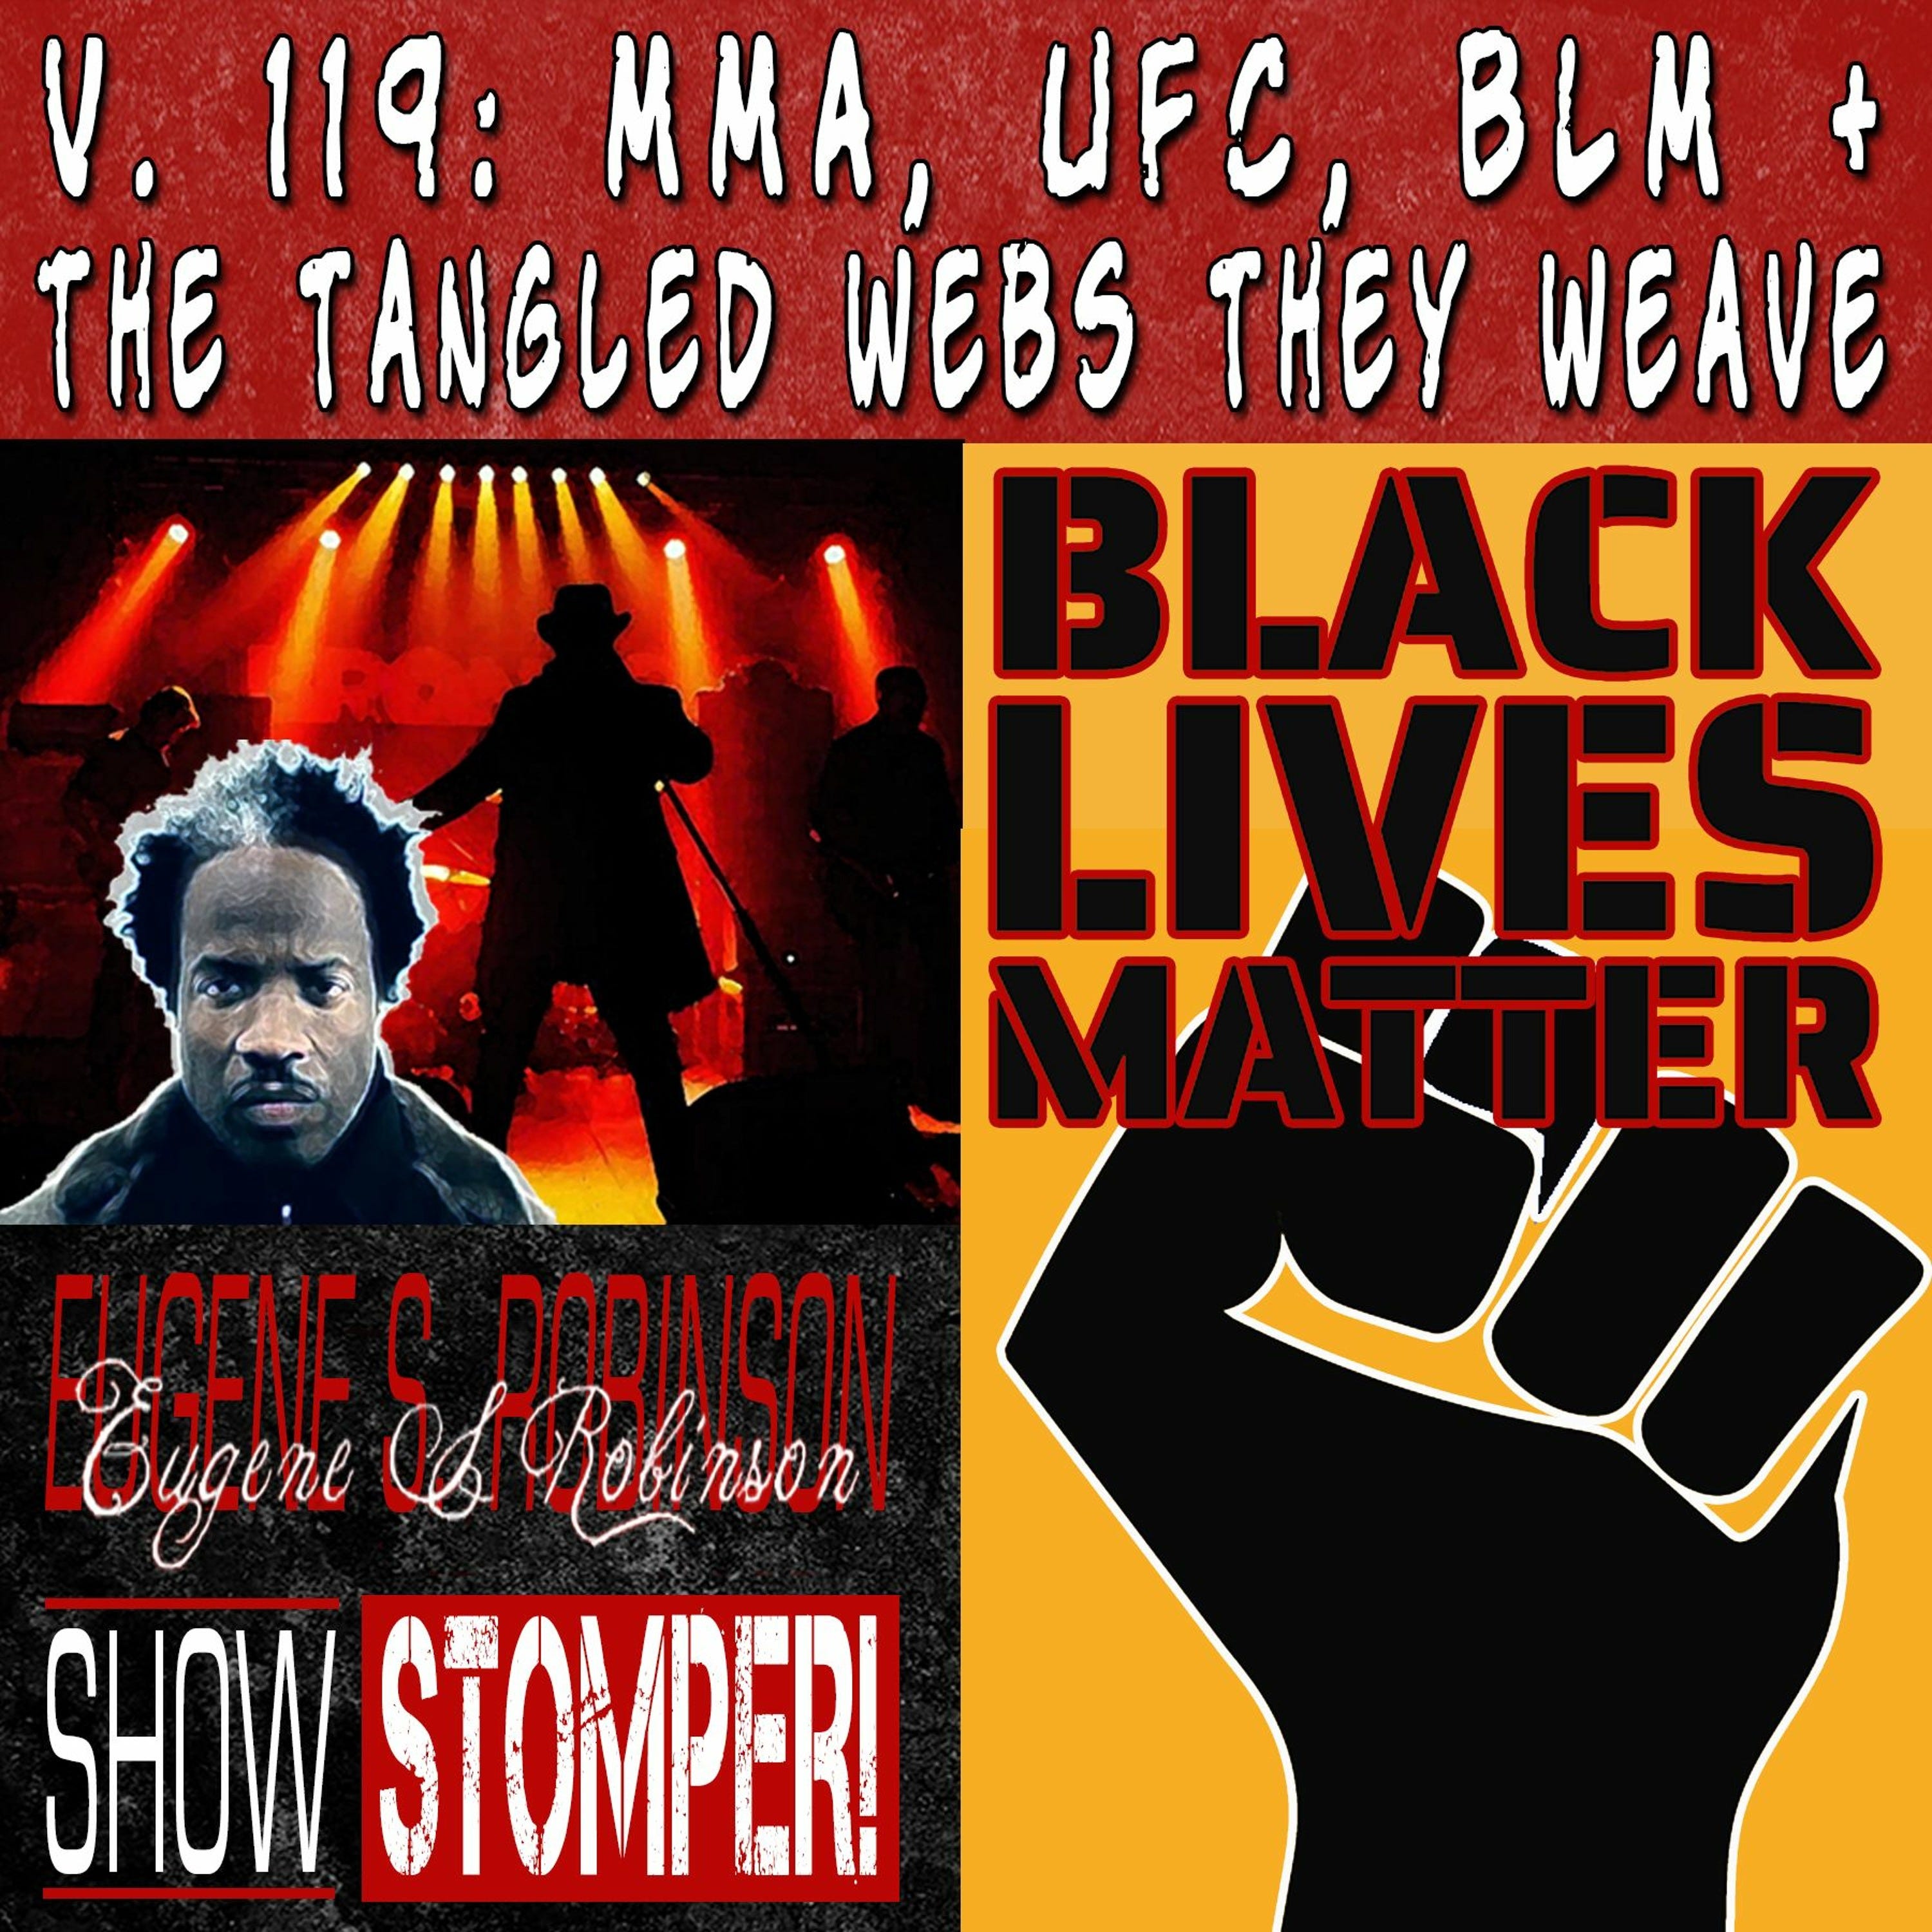 V. 119: MMA, UFC, BLM + the Tangled Webs They Weave On The Eugene S. Robinson Show Stomper!